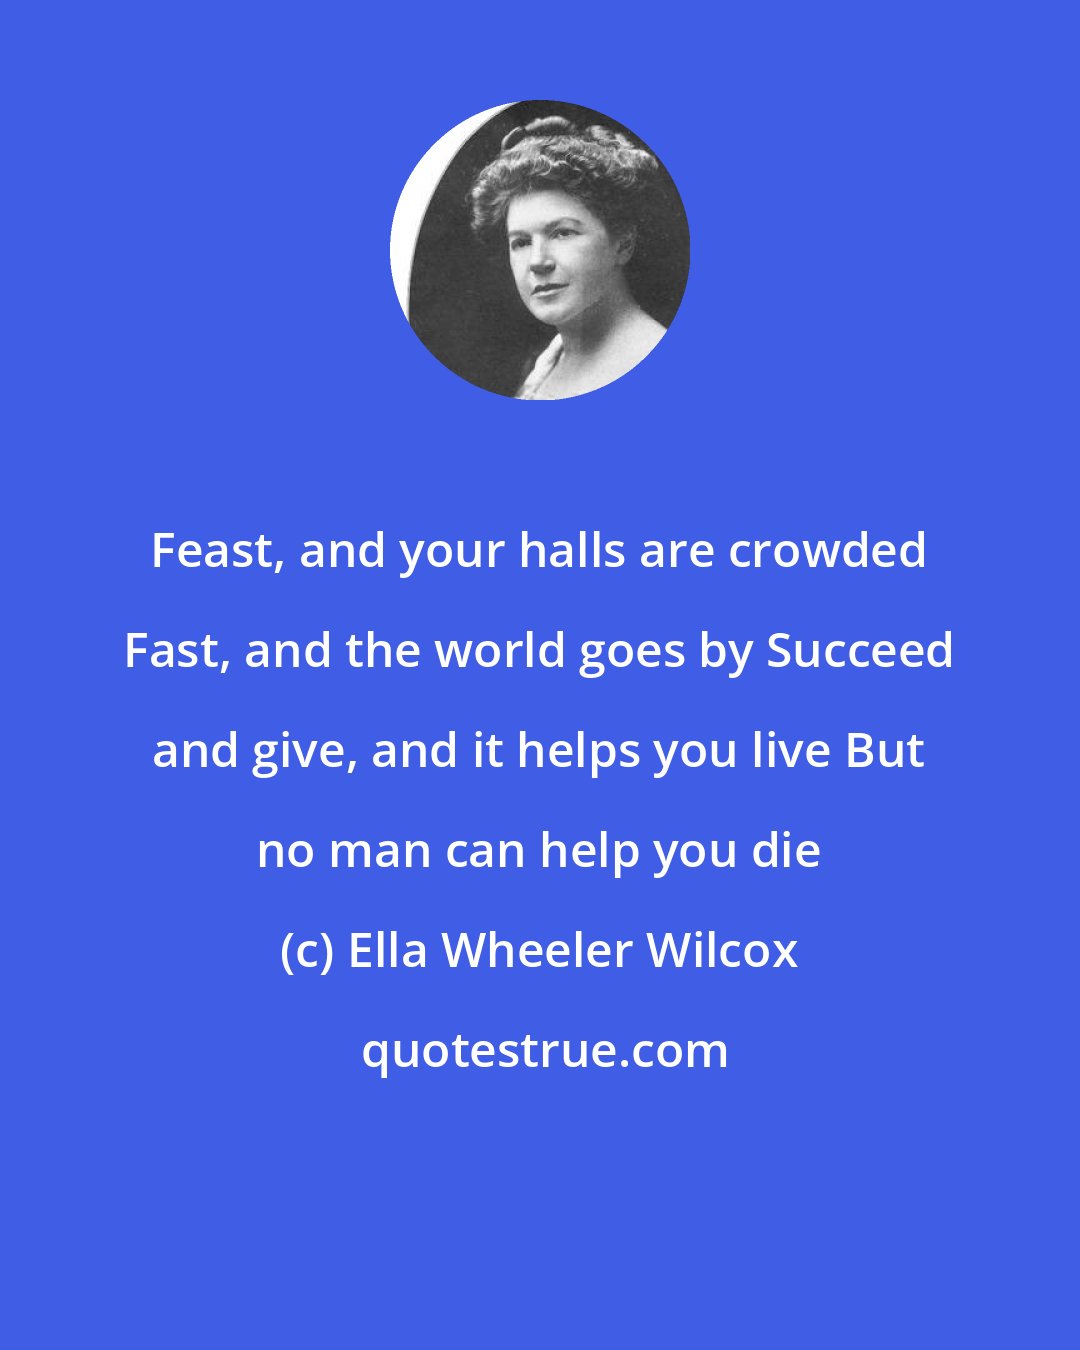 Ella Wheeler Wilcox: Feast, and your halls are crowded Fast, and the world goes by Succeed and give, and it helps you live But no man can help you die